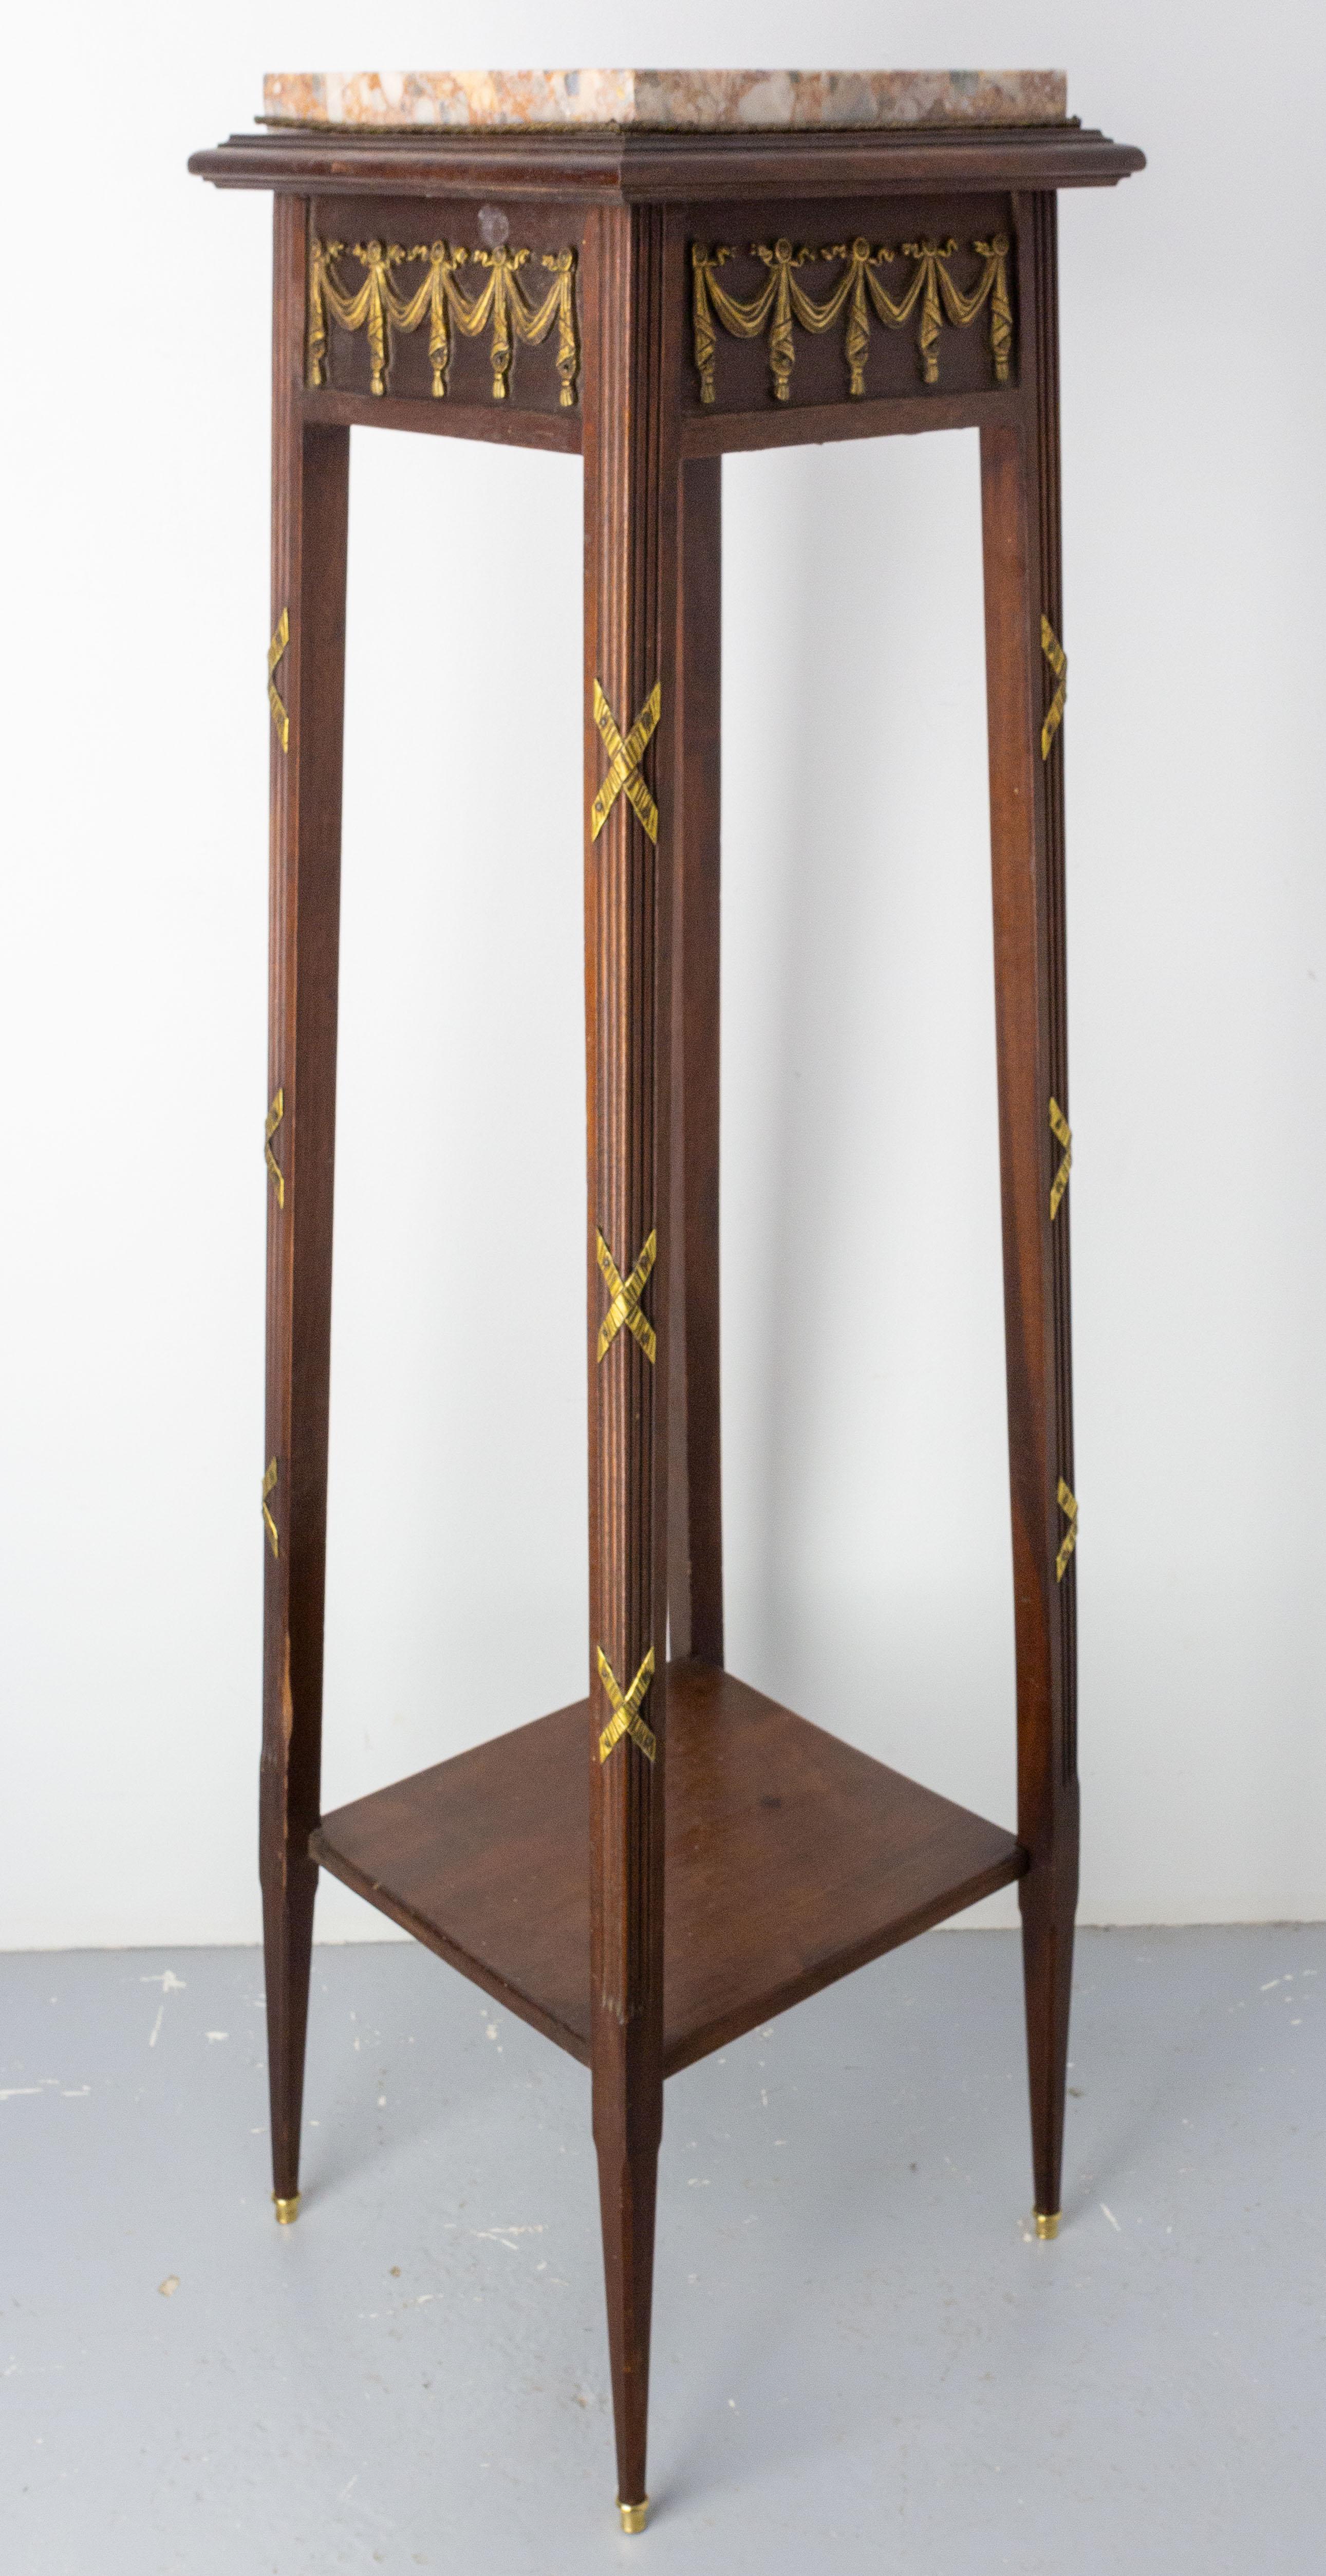 French 1900 Iroko, Marble & Brass Sellette or Plant Holder Louis XVI St, c 1900 For Sale 5